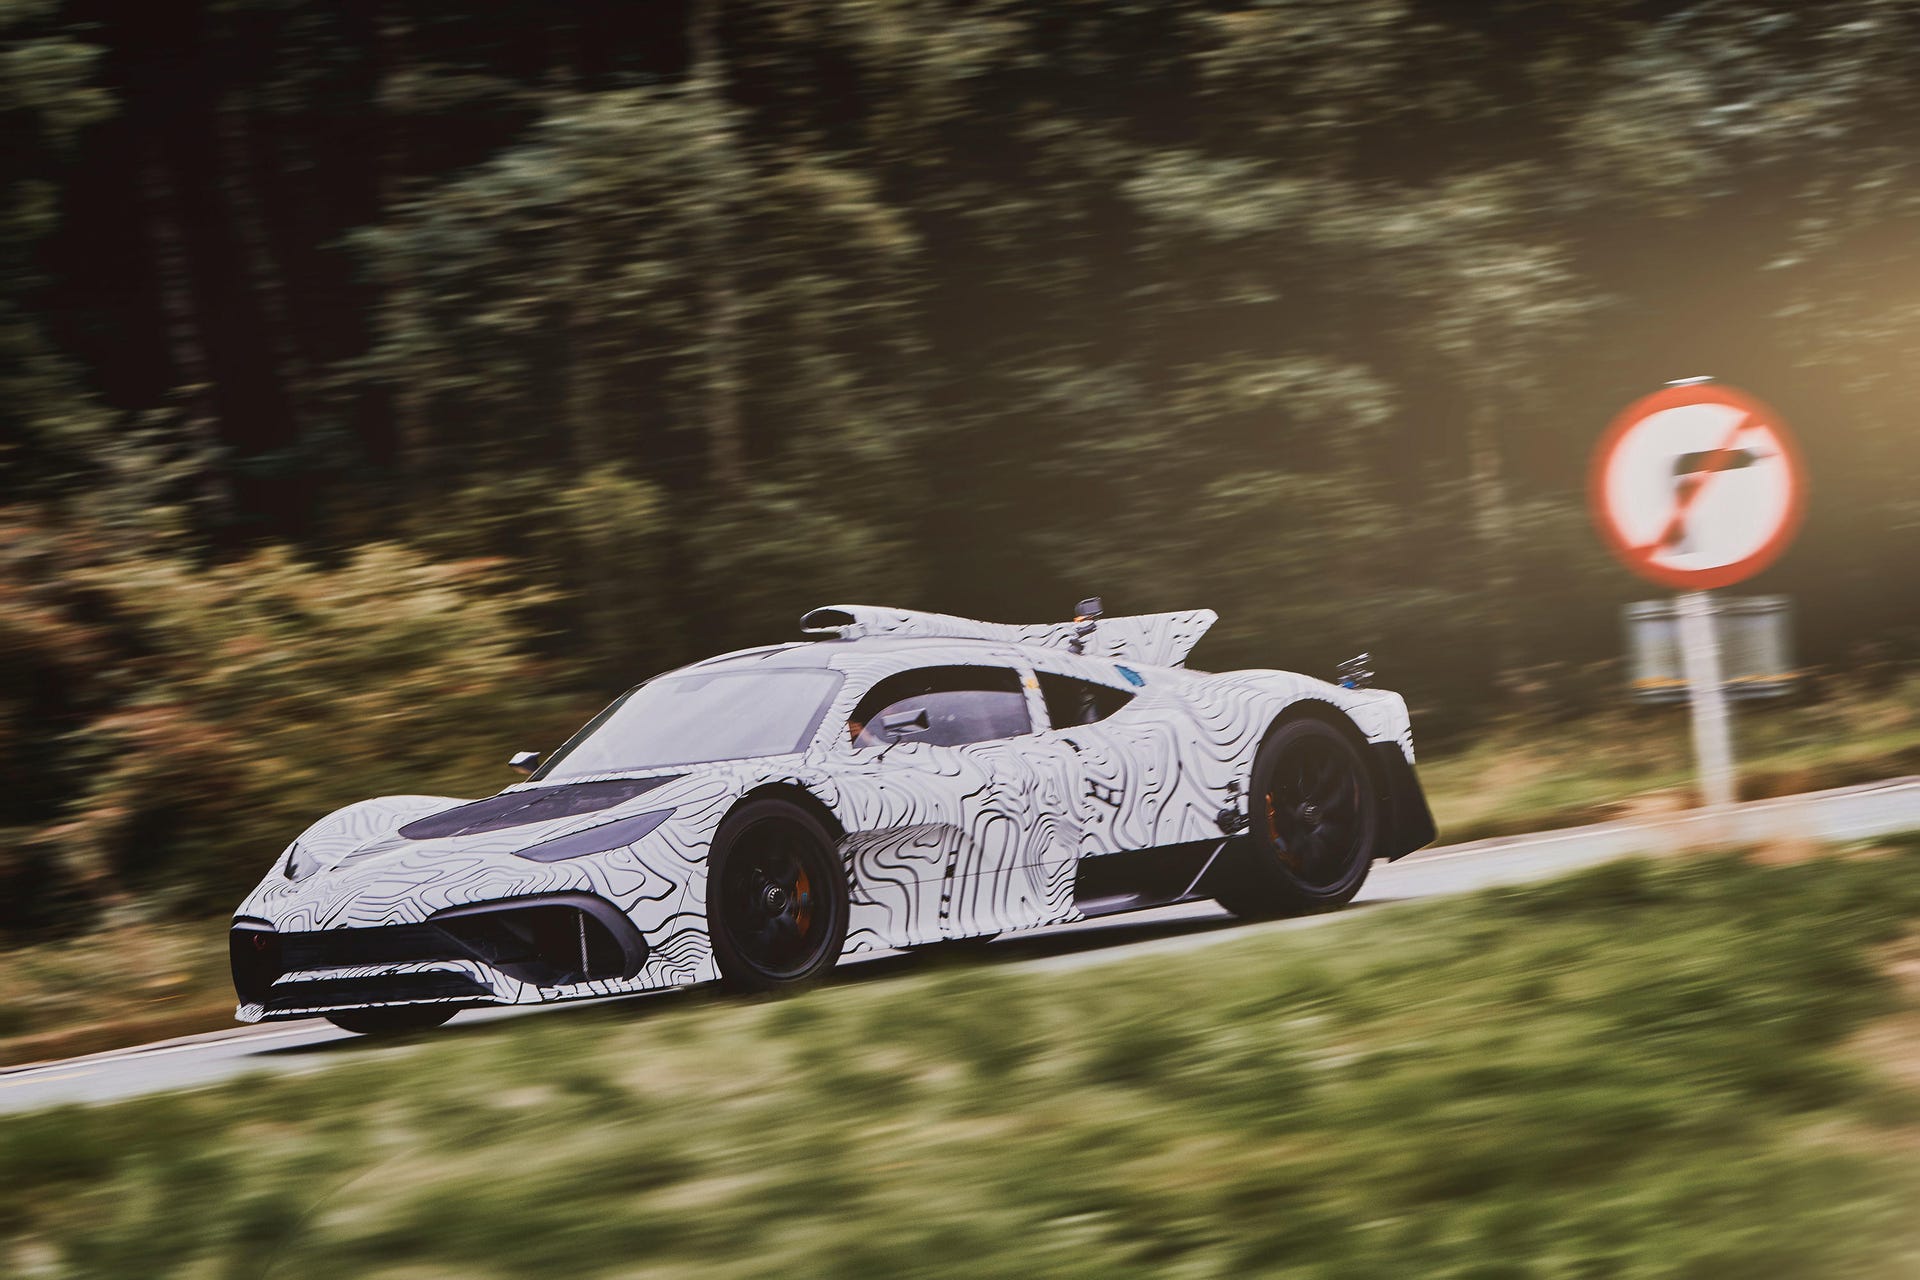 Mercedes-AMG Project One Prototype